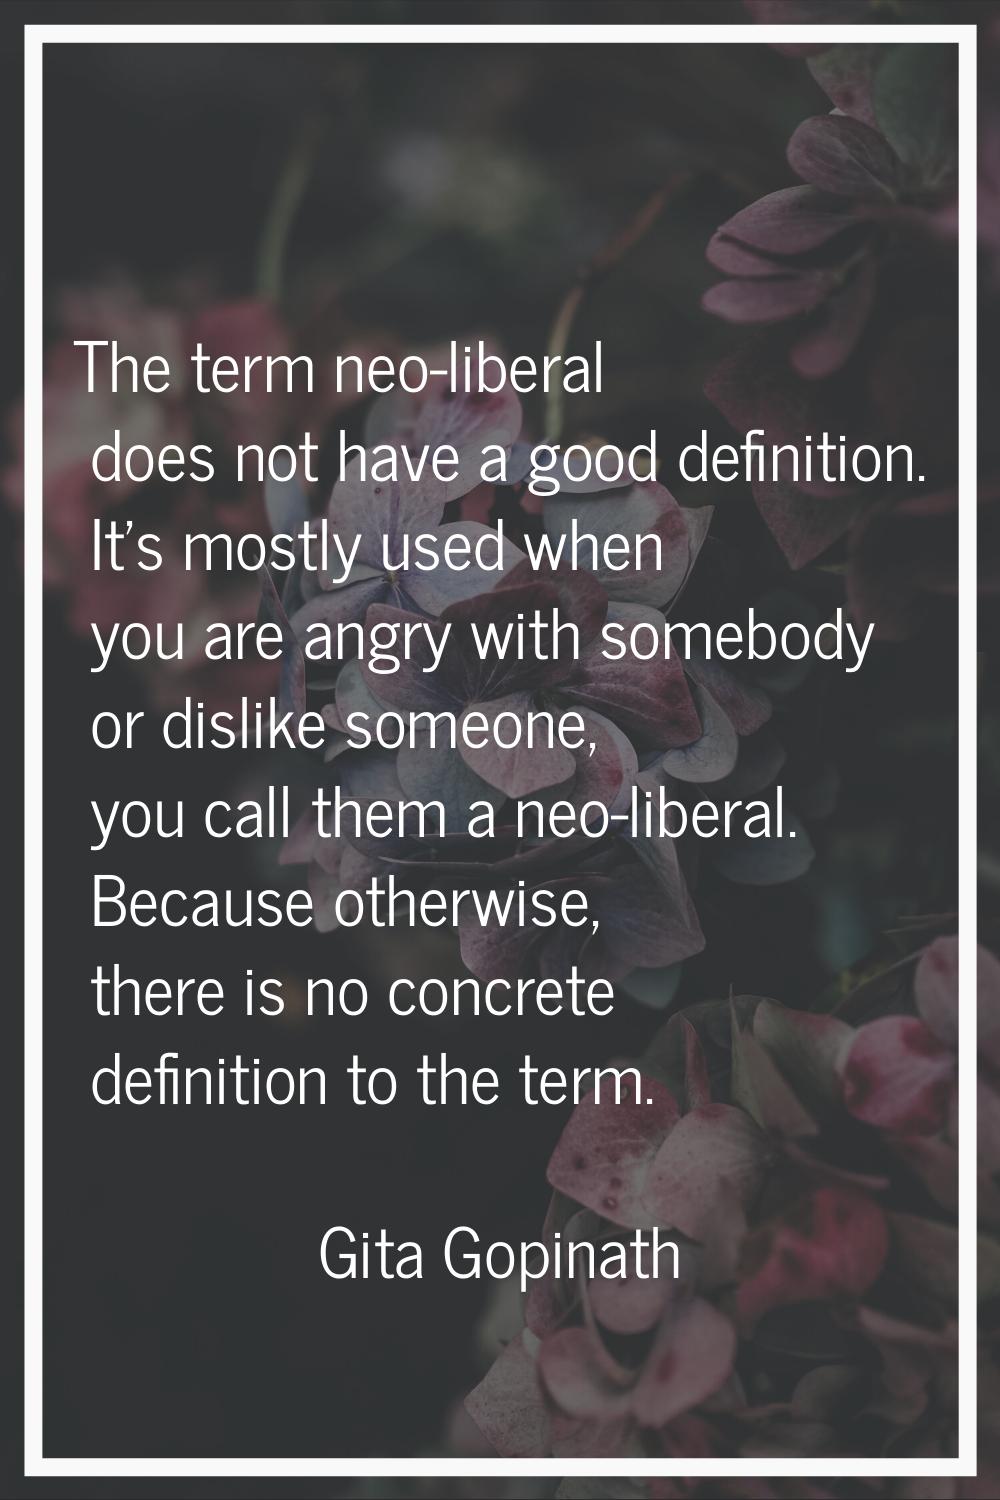 The term neo-liberal does not have a good definition. It's mostly used when you are angry with some